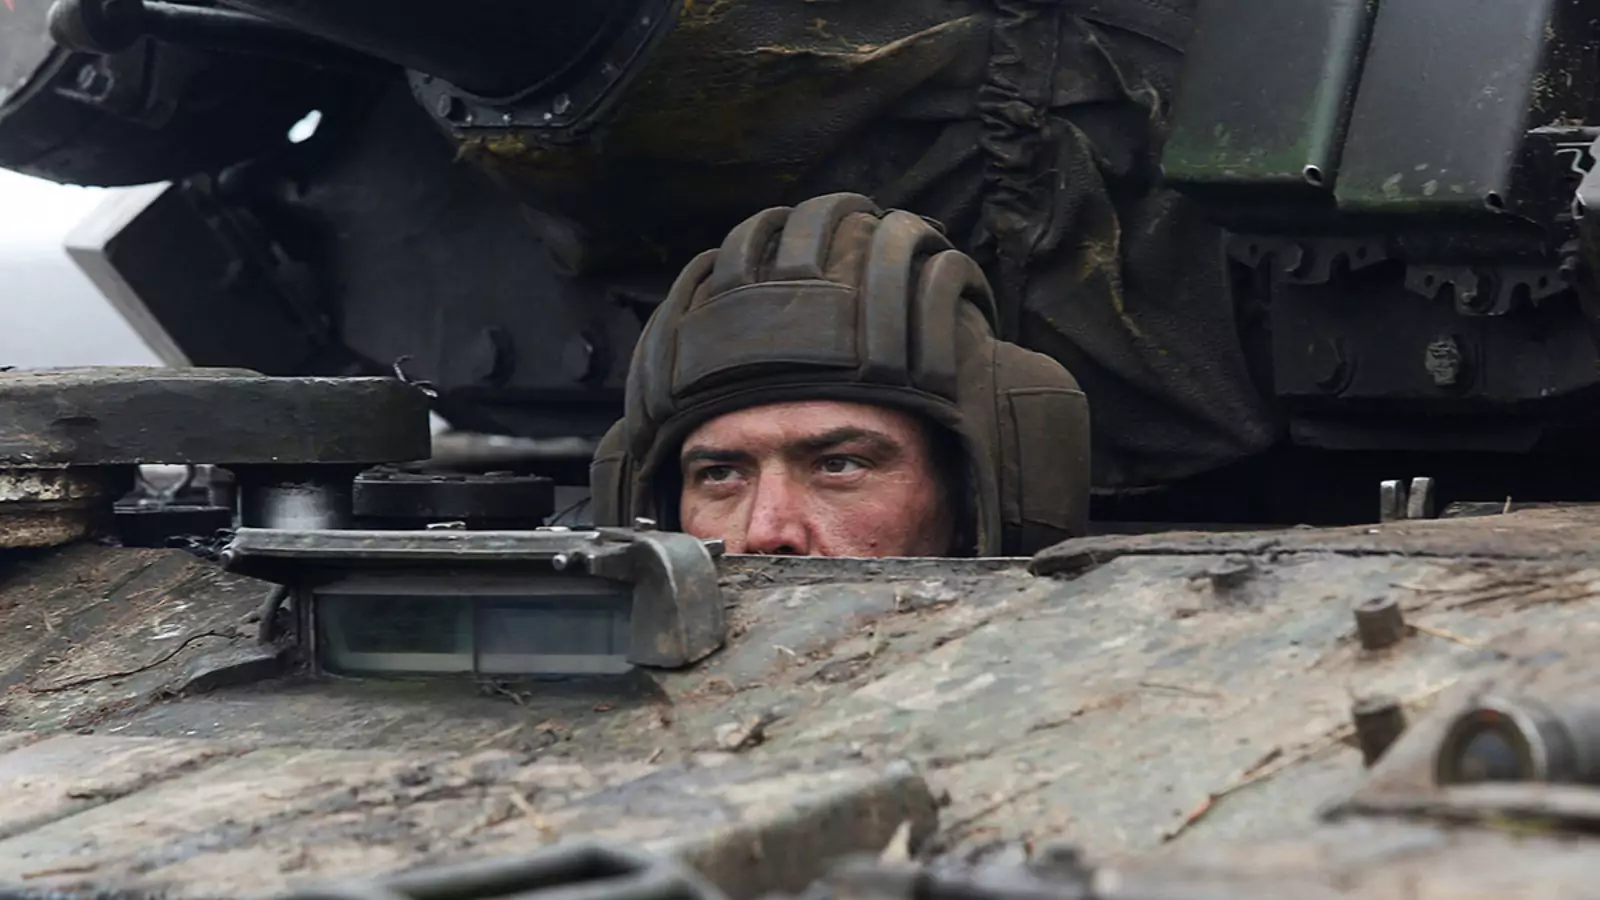 A serviceman of pro-Russian militia in a tank of armed forces of the separatist self-proclaimed Luhansk People's Republic on February 27, 2022